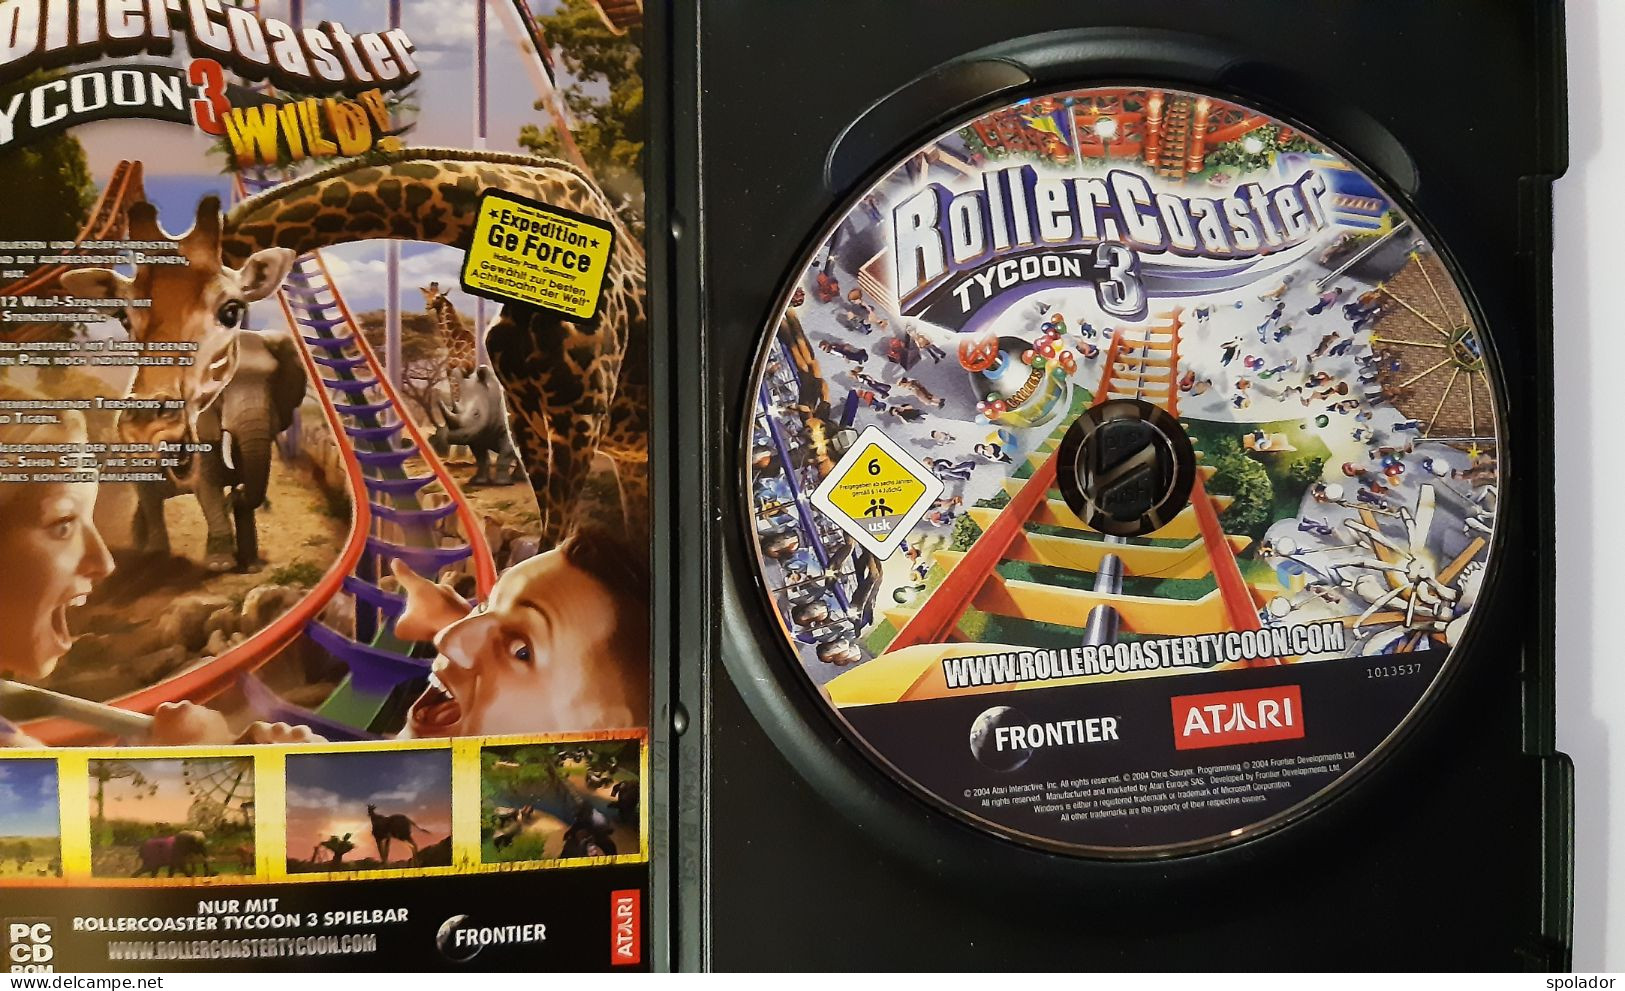 Roller Coaster Tycoon 3-PC CD-ROM-Scream Your Dream!-Video Game-Atari-2004-Like NEW - PC-Spiele